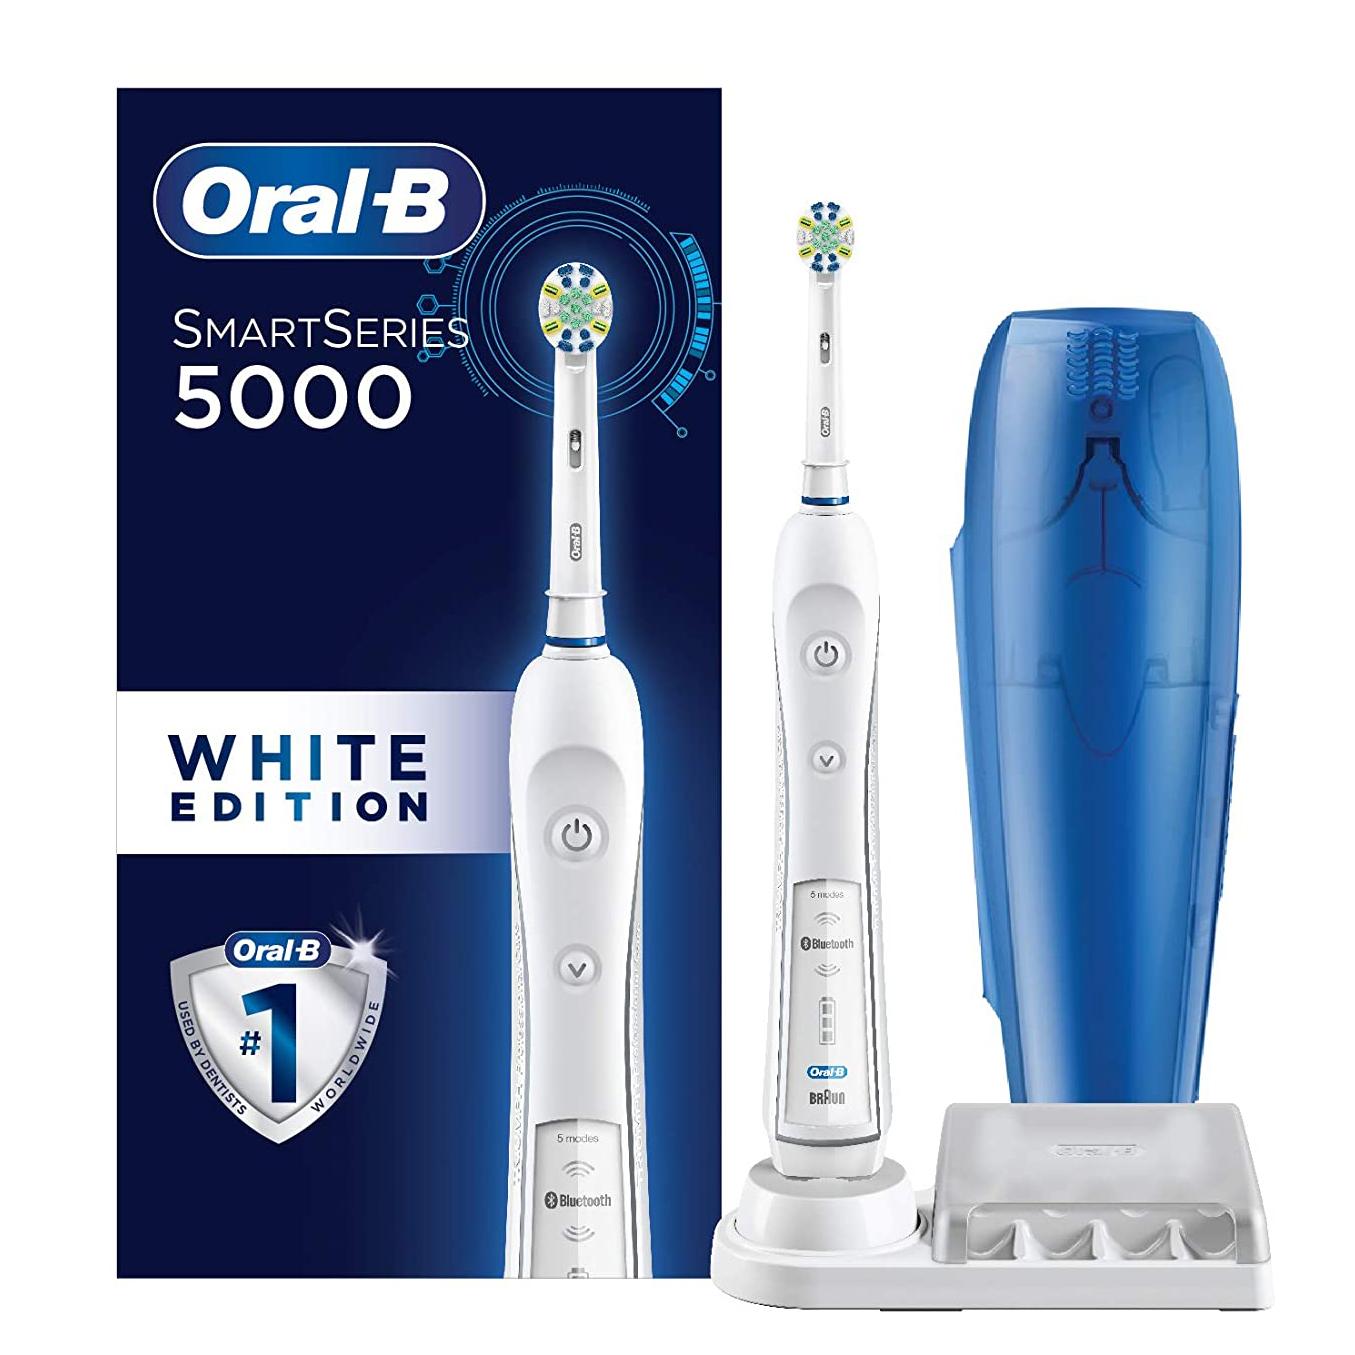 Oral-B Pro 5000 Smartseries Electric Toothbrush with Bluetooth for $54.99 Shipped